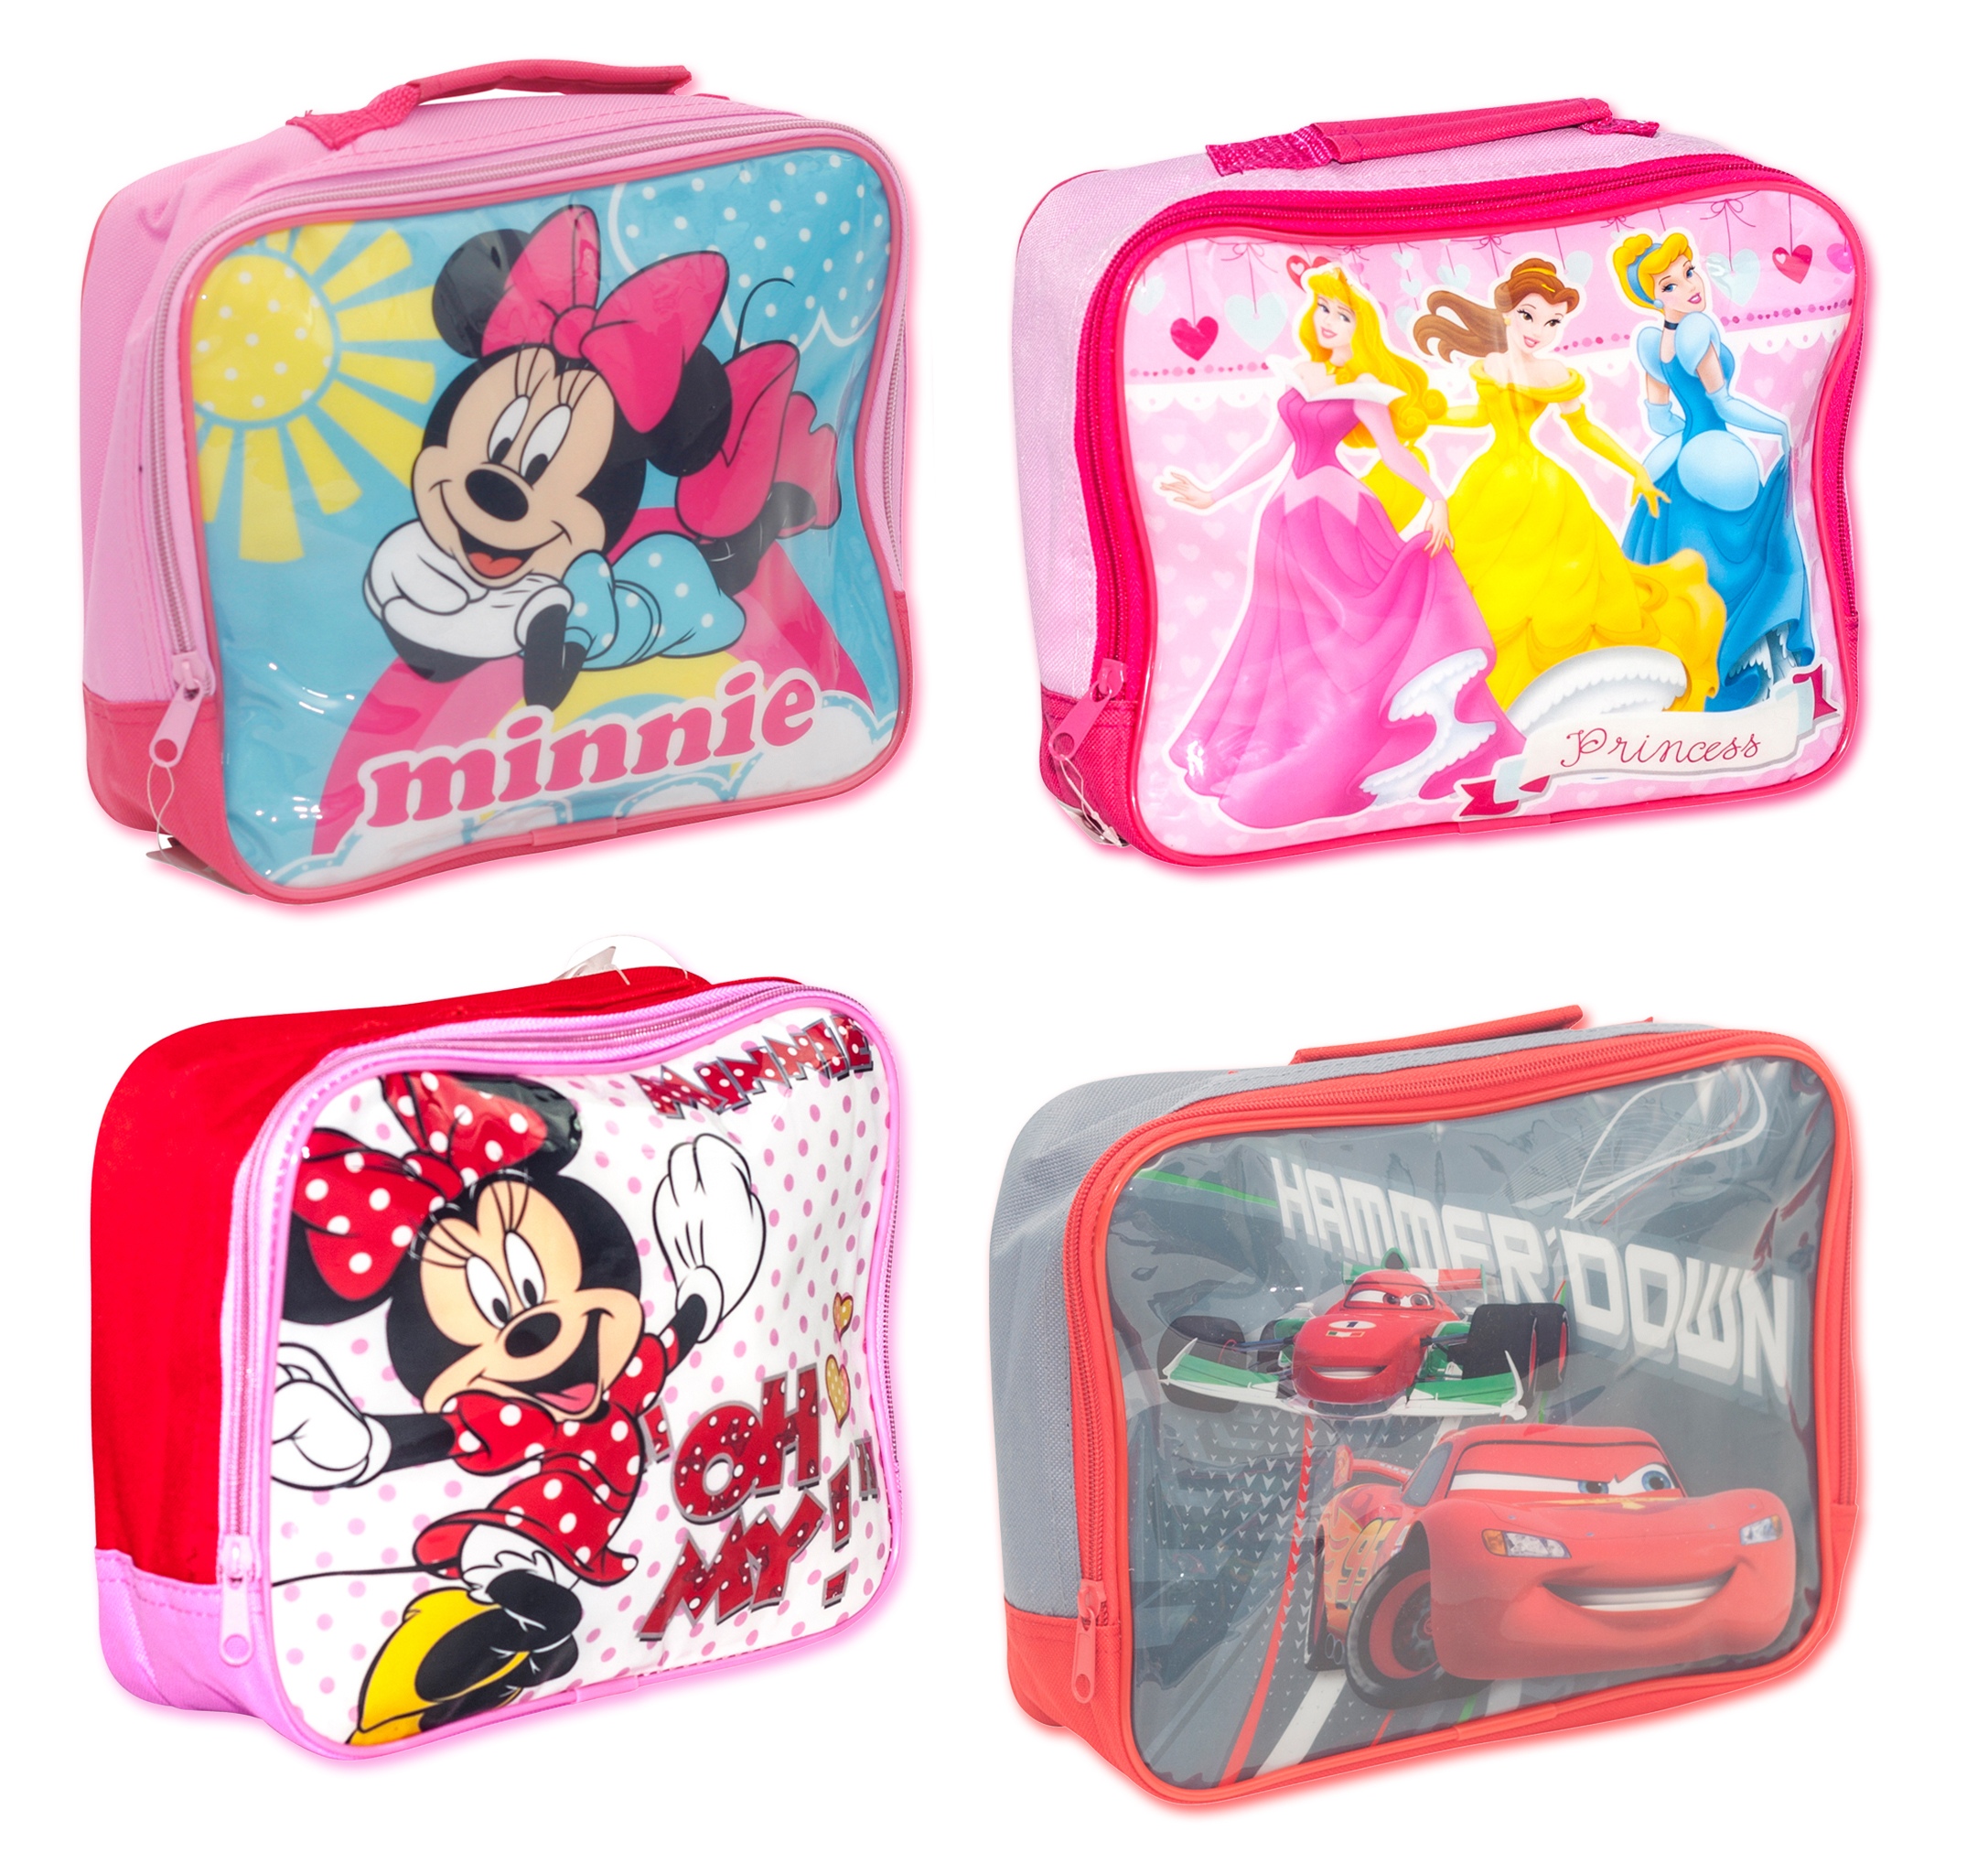 Children's Trucks Theme Insulated Lunch Bags